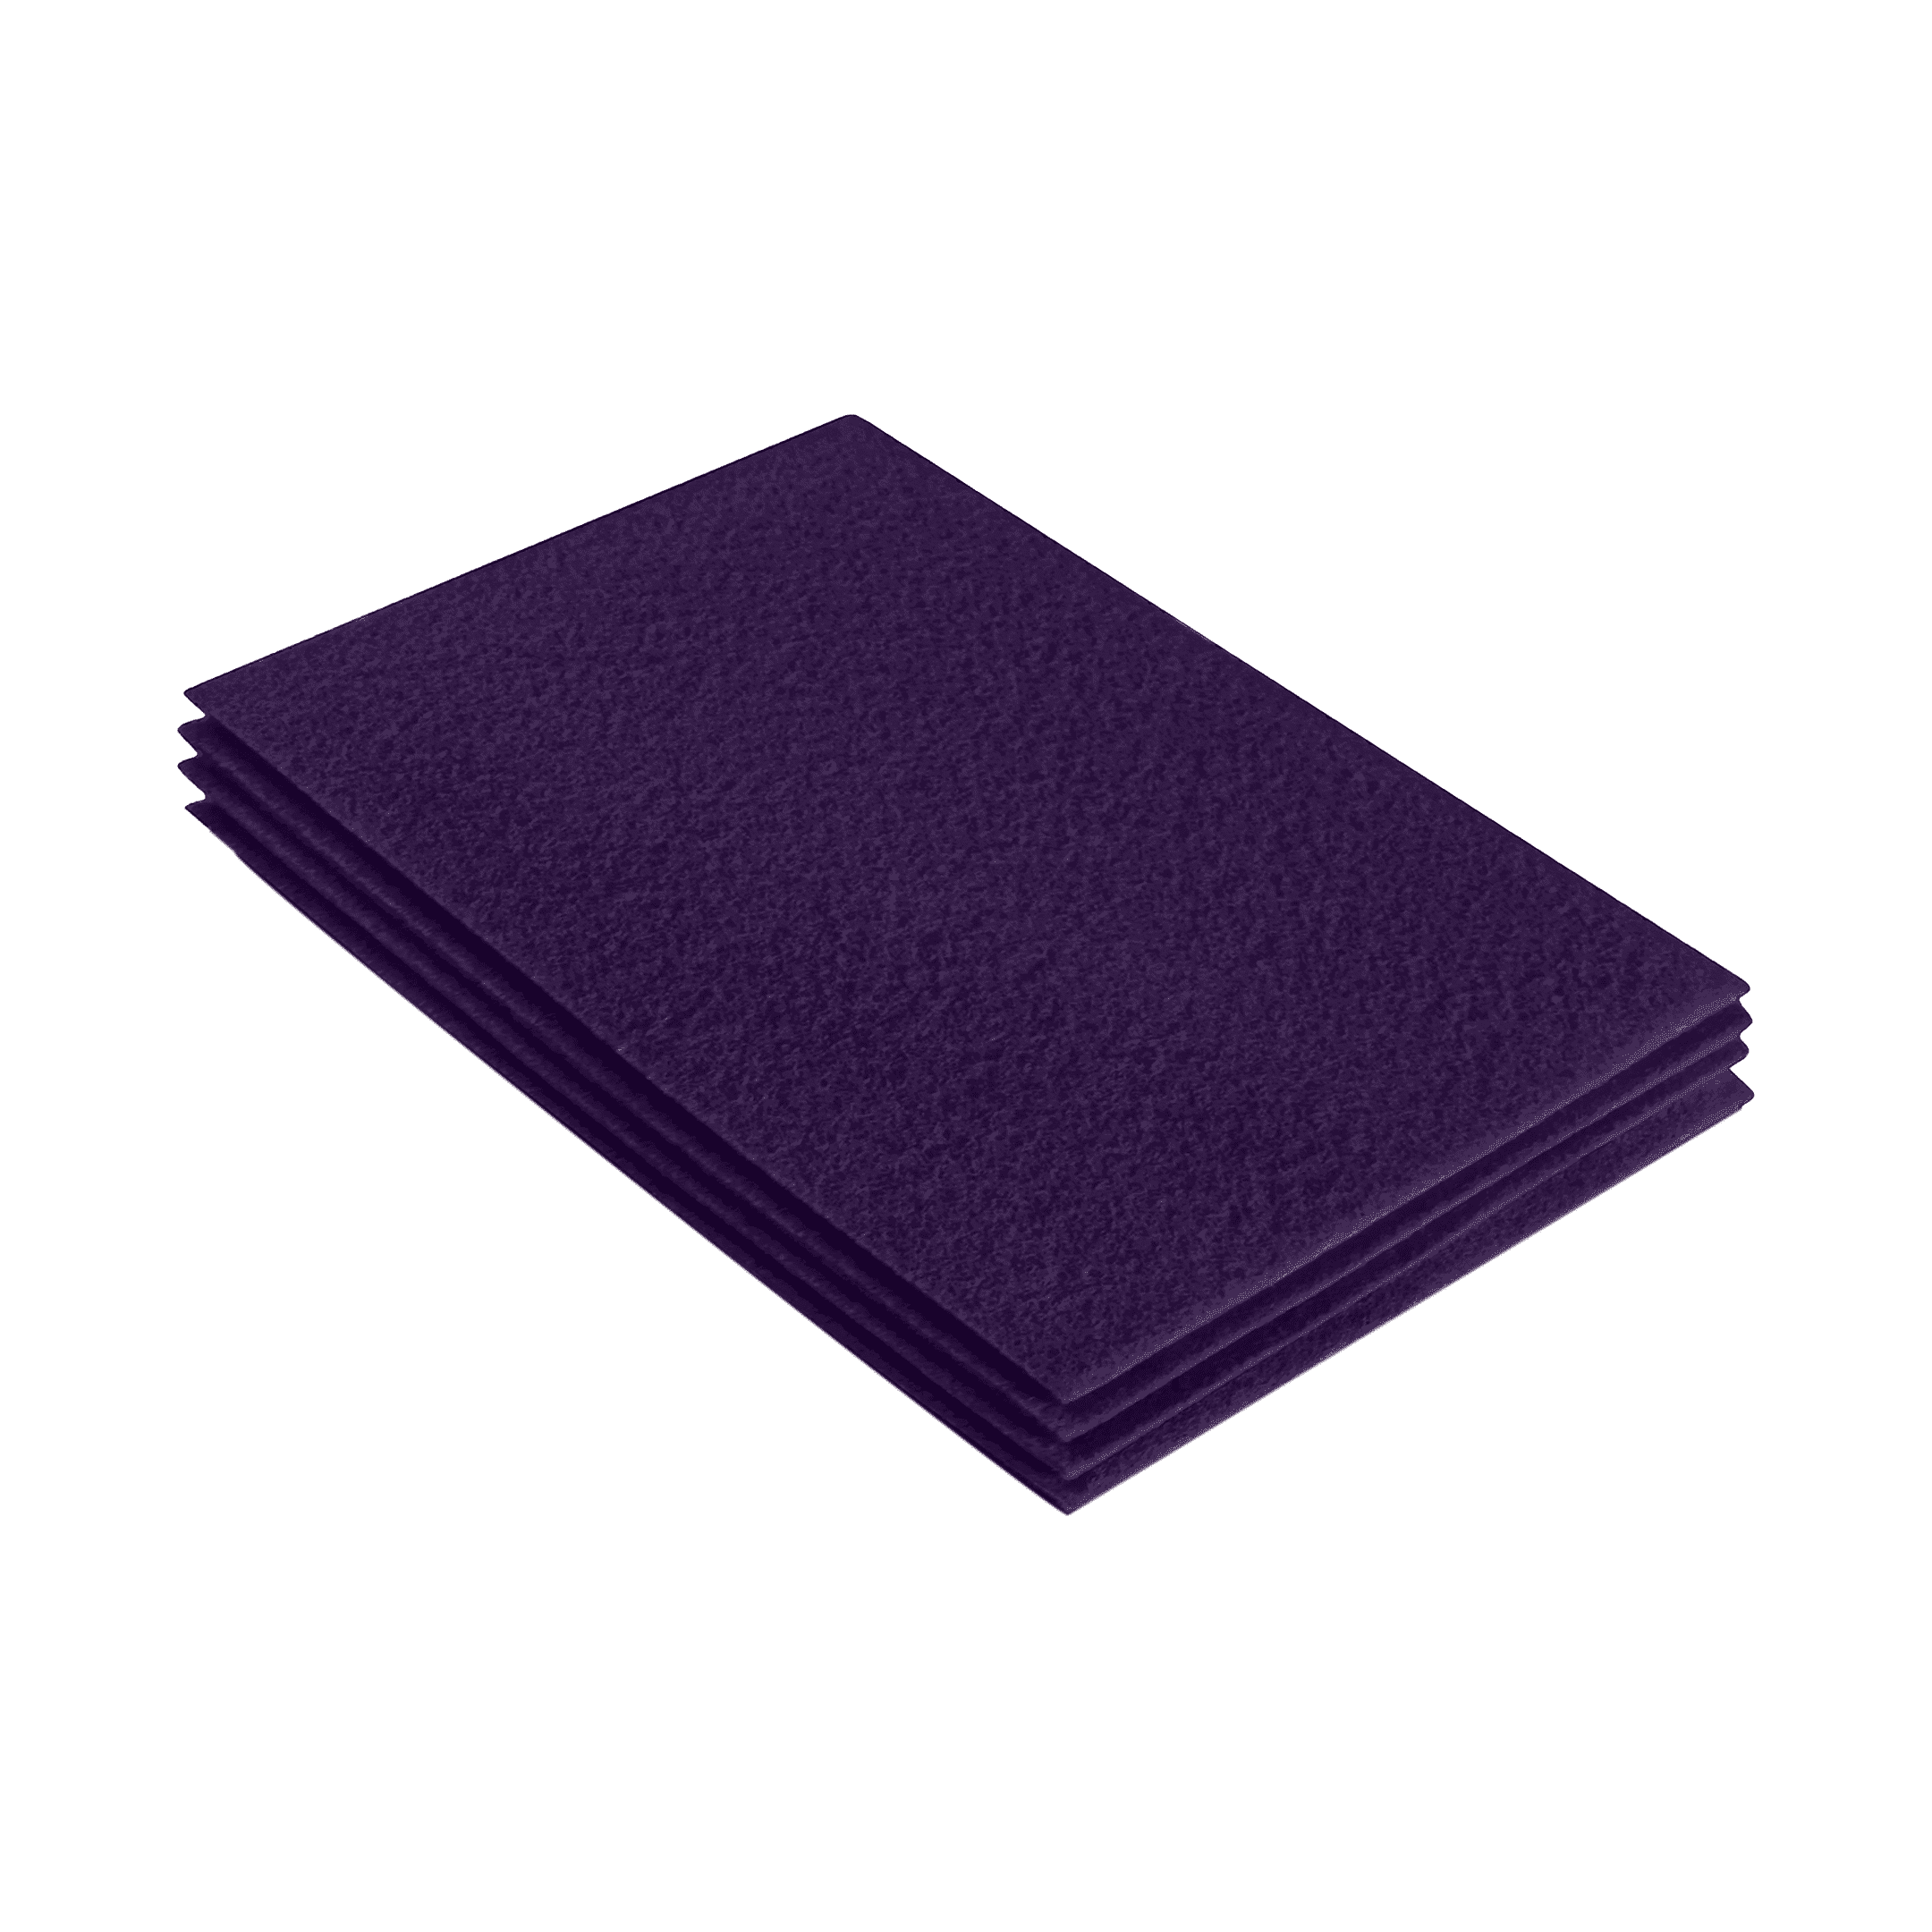 Remarkable U Stiff Felt Sheets for Crafts, 9x12 Inches | 3mm Thick Purple Craft Fabric | Hard Felt Pieces for Kids, Crafting, Sewing, Art Projects 